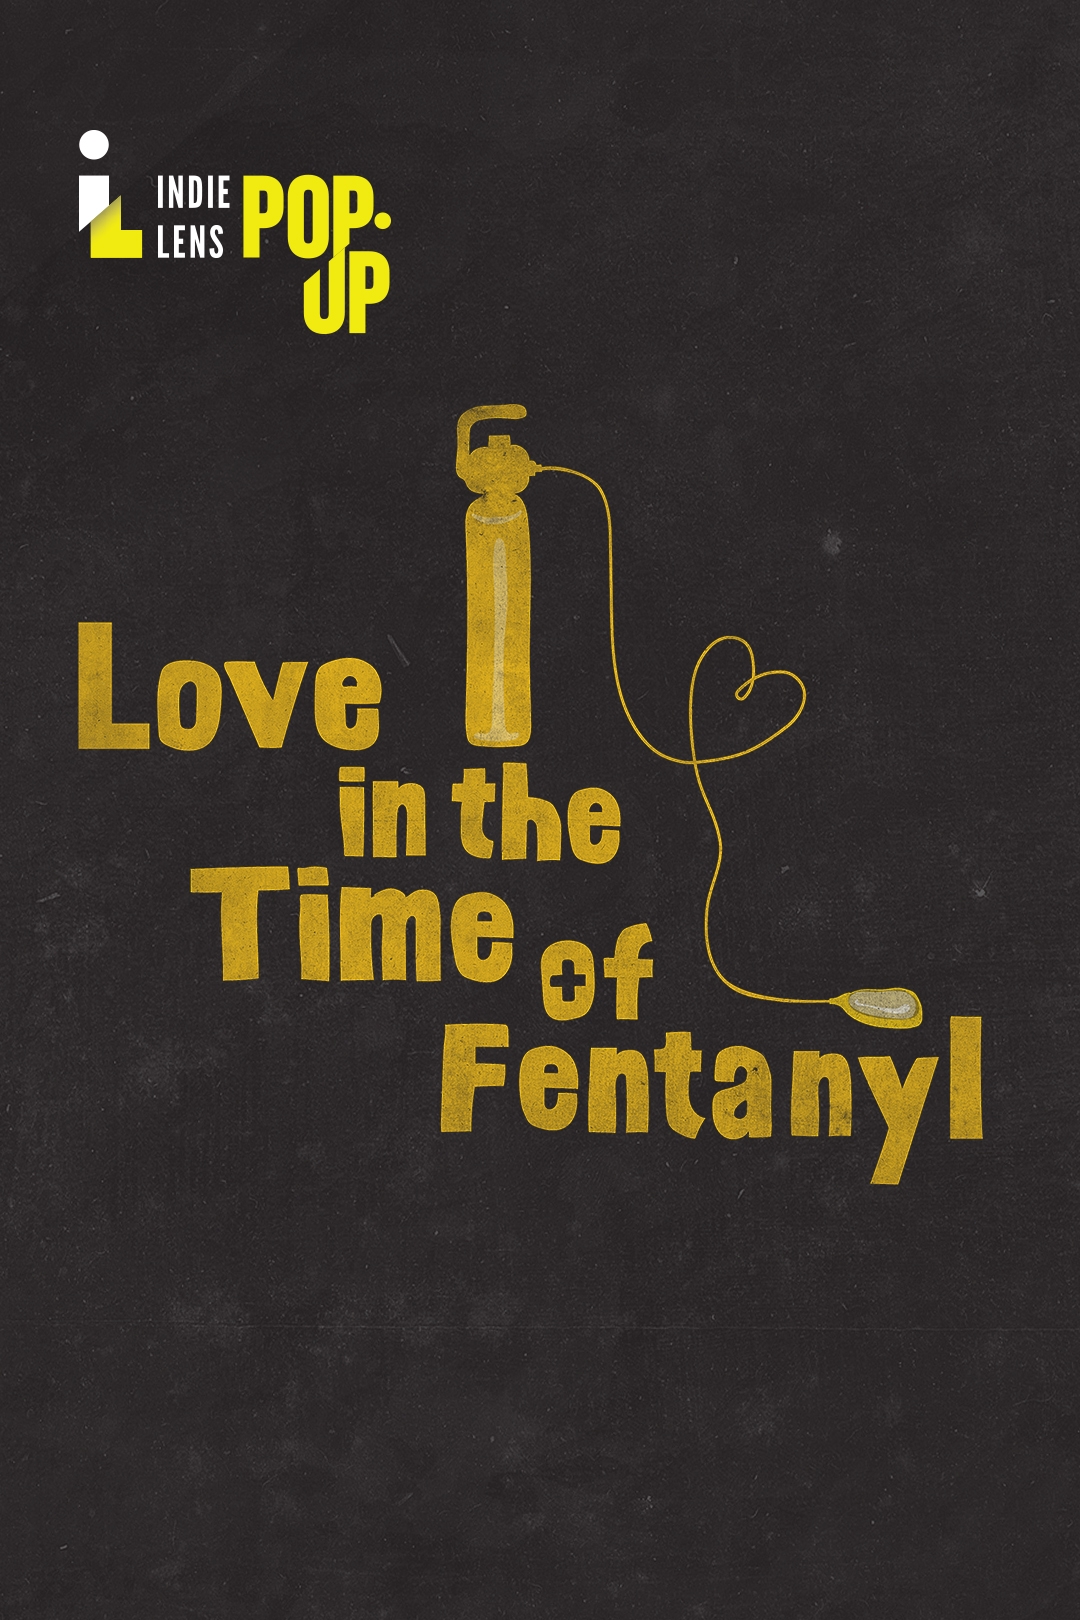 Love in the time of Fentanyl